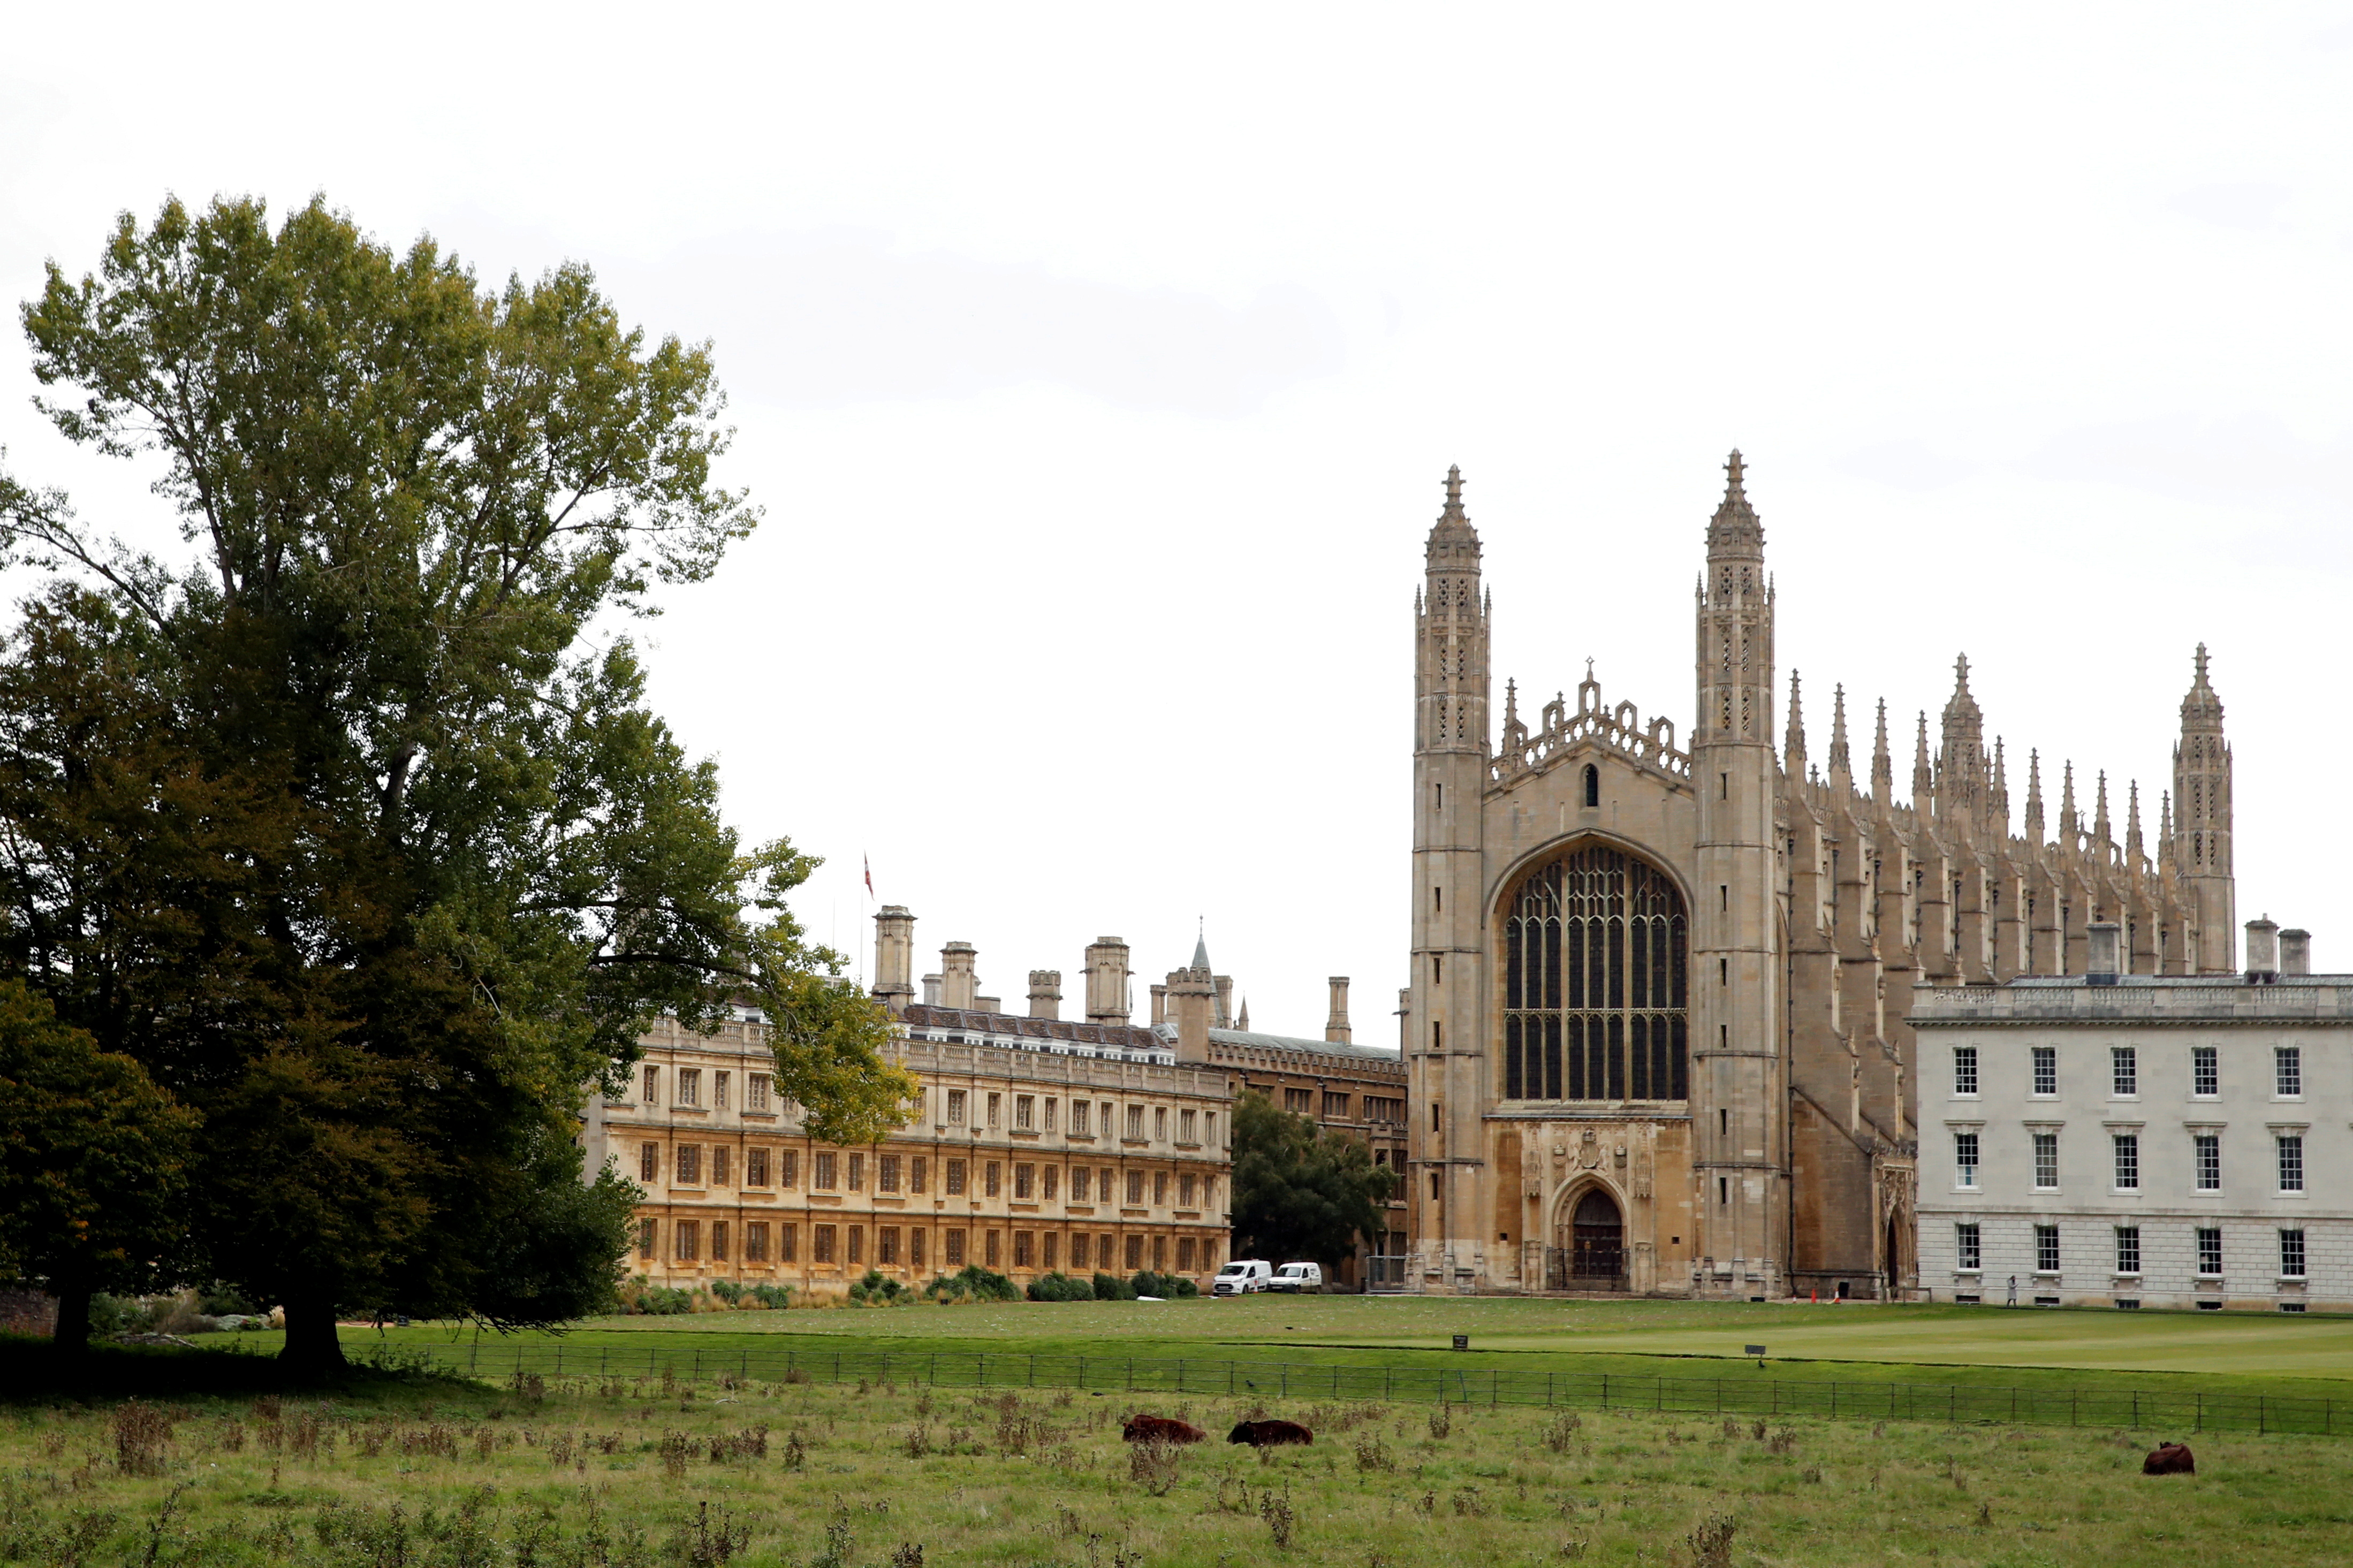 Among the participating universities is the University of Cambridge, one of the leading British institutions, which has signed agreements with Tsinghua, the university of Chinese President Xi Jinping.  (Reuters/Matthew Childs/File)